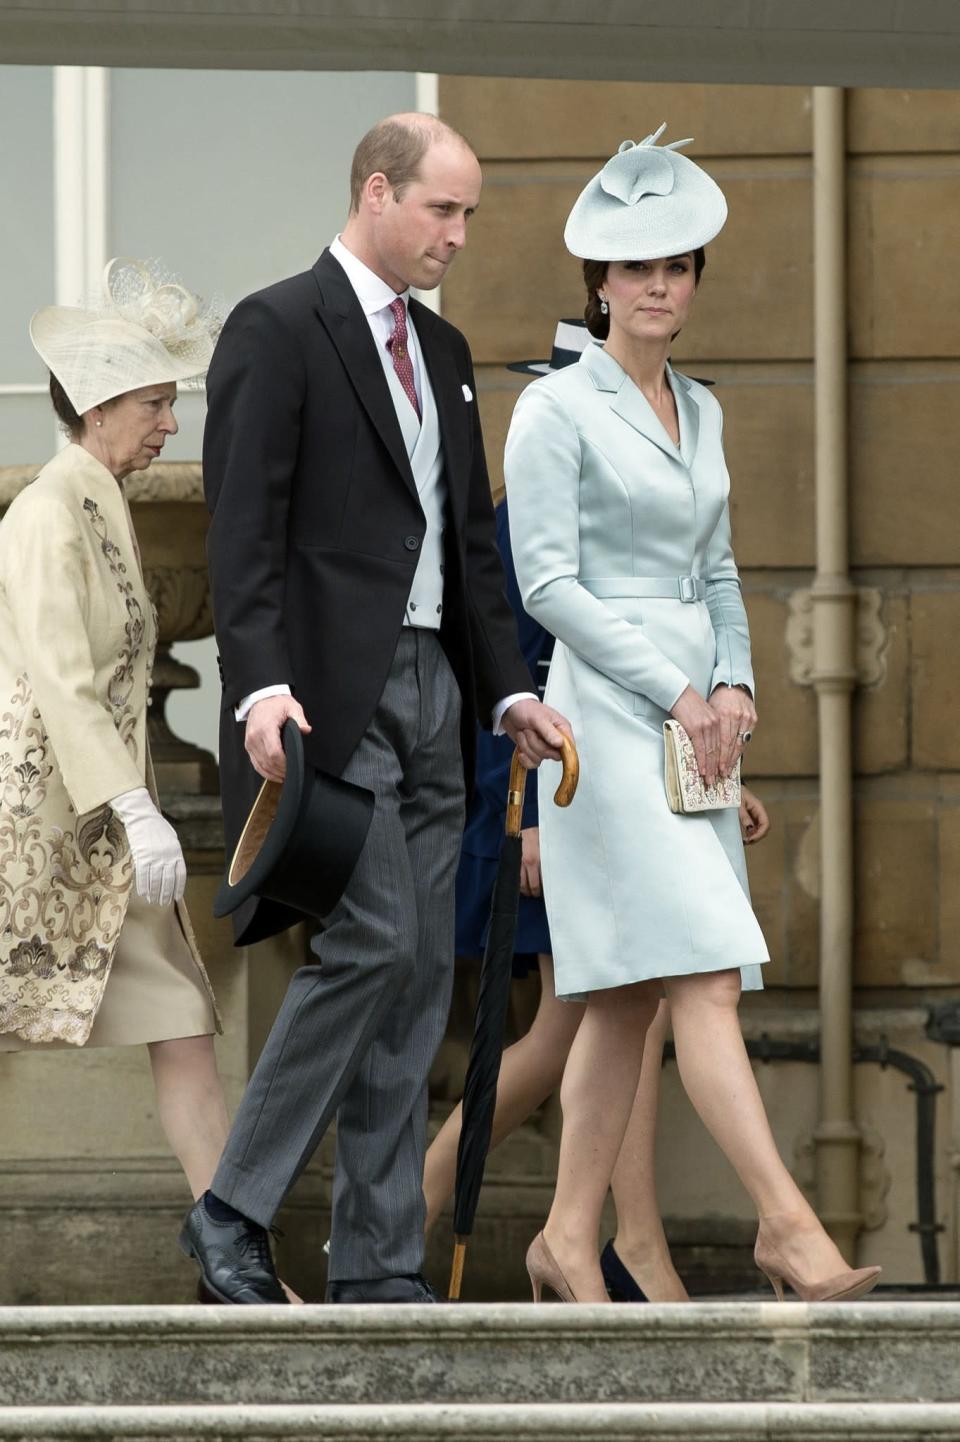 <p>Kate attended the Queen’s first garden party of 2017 wearing an icy blue coat dress by Christopher Kane. This was the third time the Duchess had worn the pastel style, first sporting the look at the 2012 Olympics Opening Ceremony. A matching Lock & Co hat and suede Gianvito Rossi heels finished off the ensemble.<br><i>[Photo: PA]</i> </p>